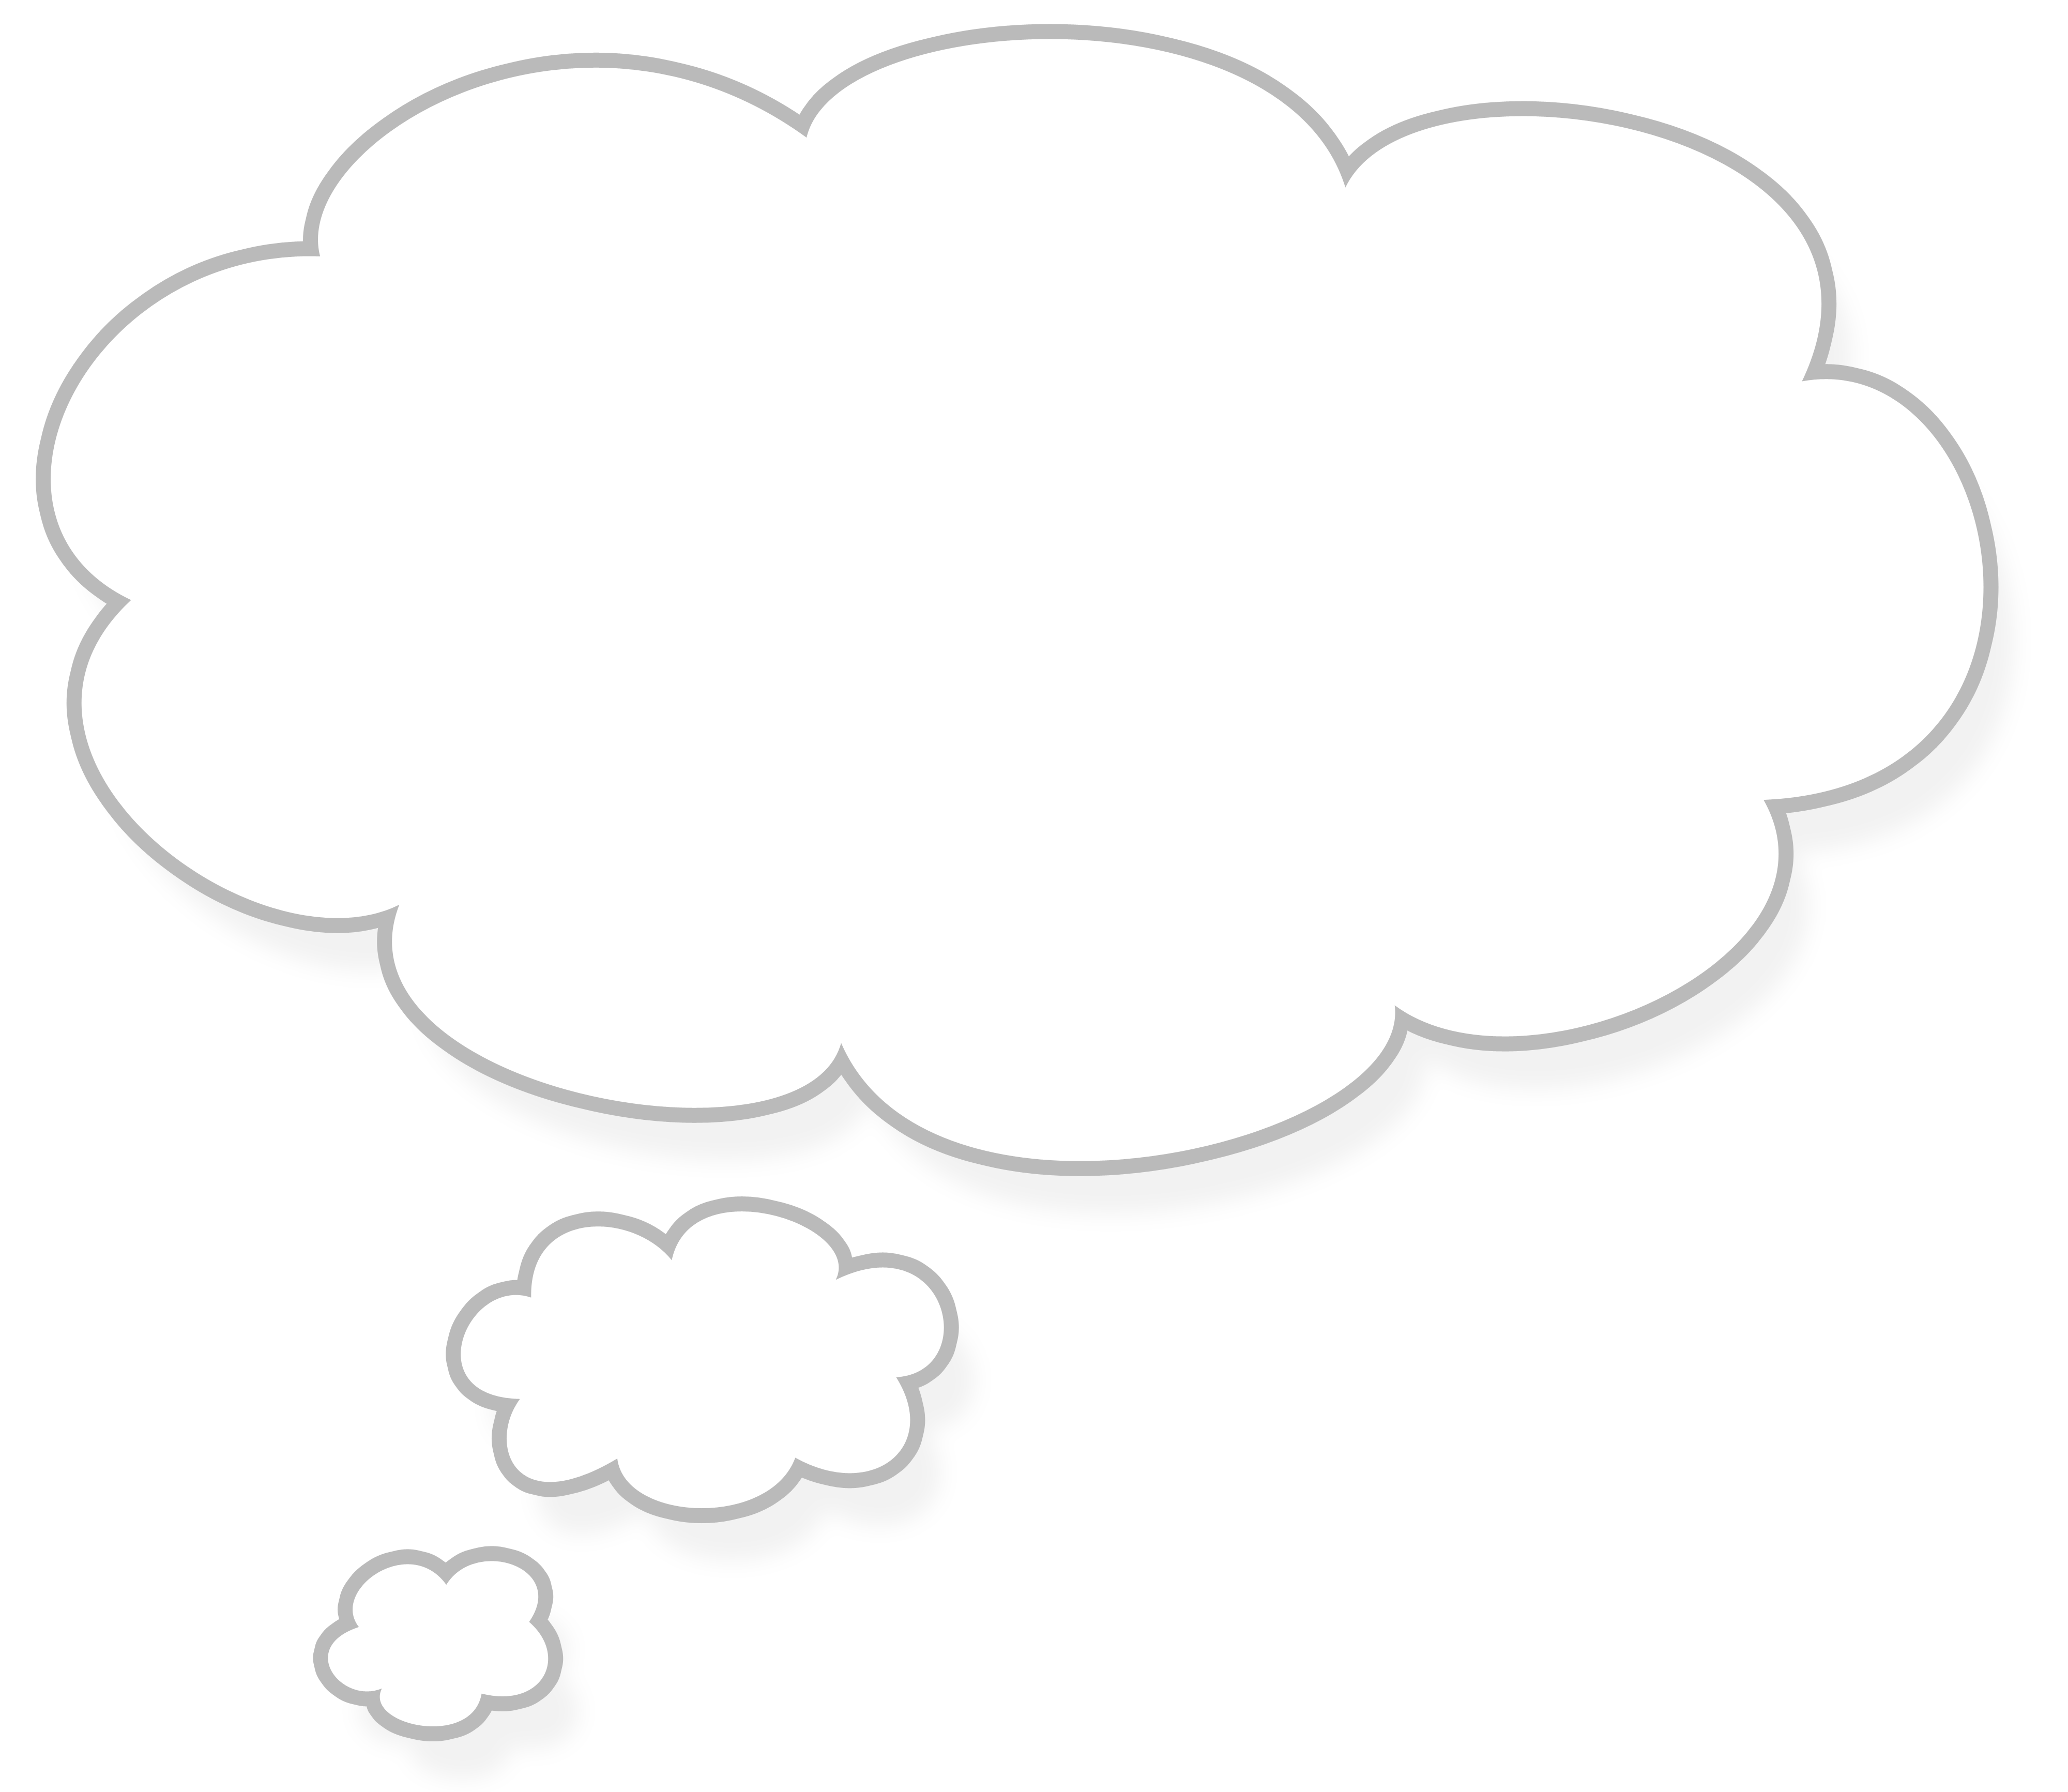 Thought Cloud | Free Images at Clker.com - vector clip art online ...